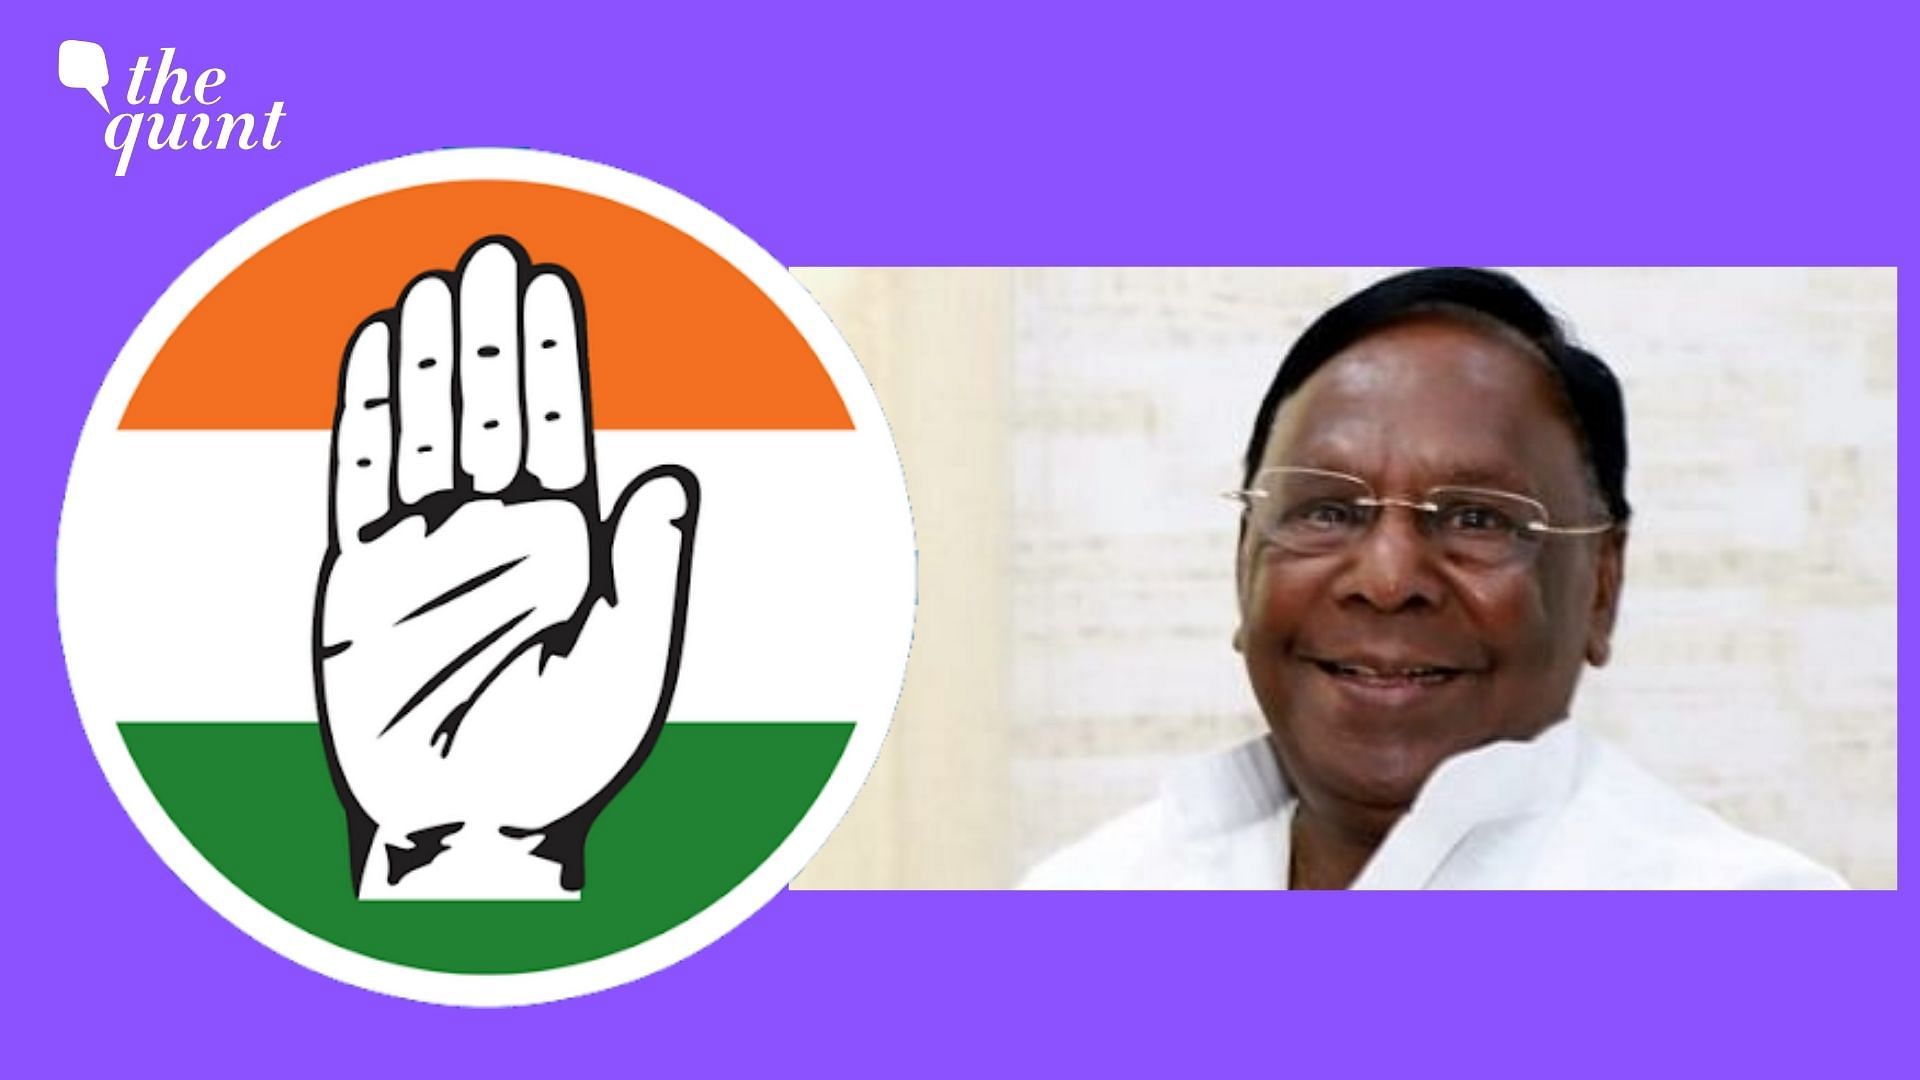 Former Chief Minister V Narayanasamy will not be contesting the 2021 assembly elections in Puducherry, Dinesh Gundu Rao, Puducherry Congress incharge informed on Tuesday, 16 March.